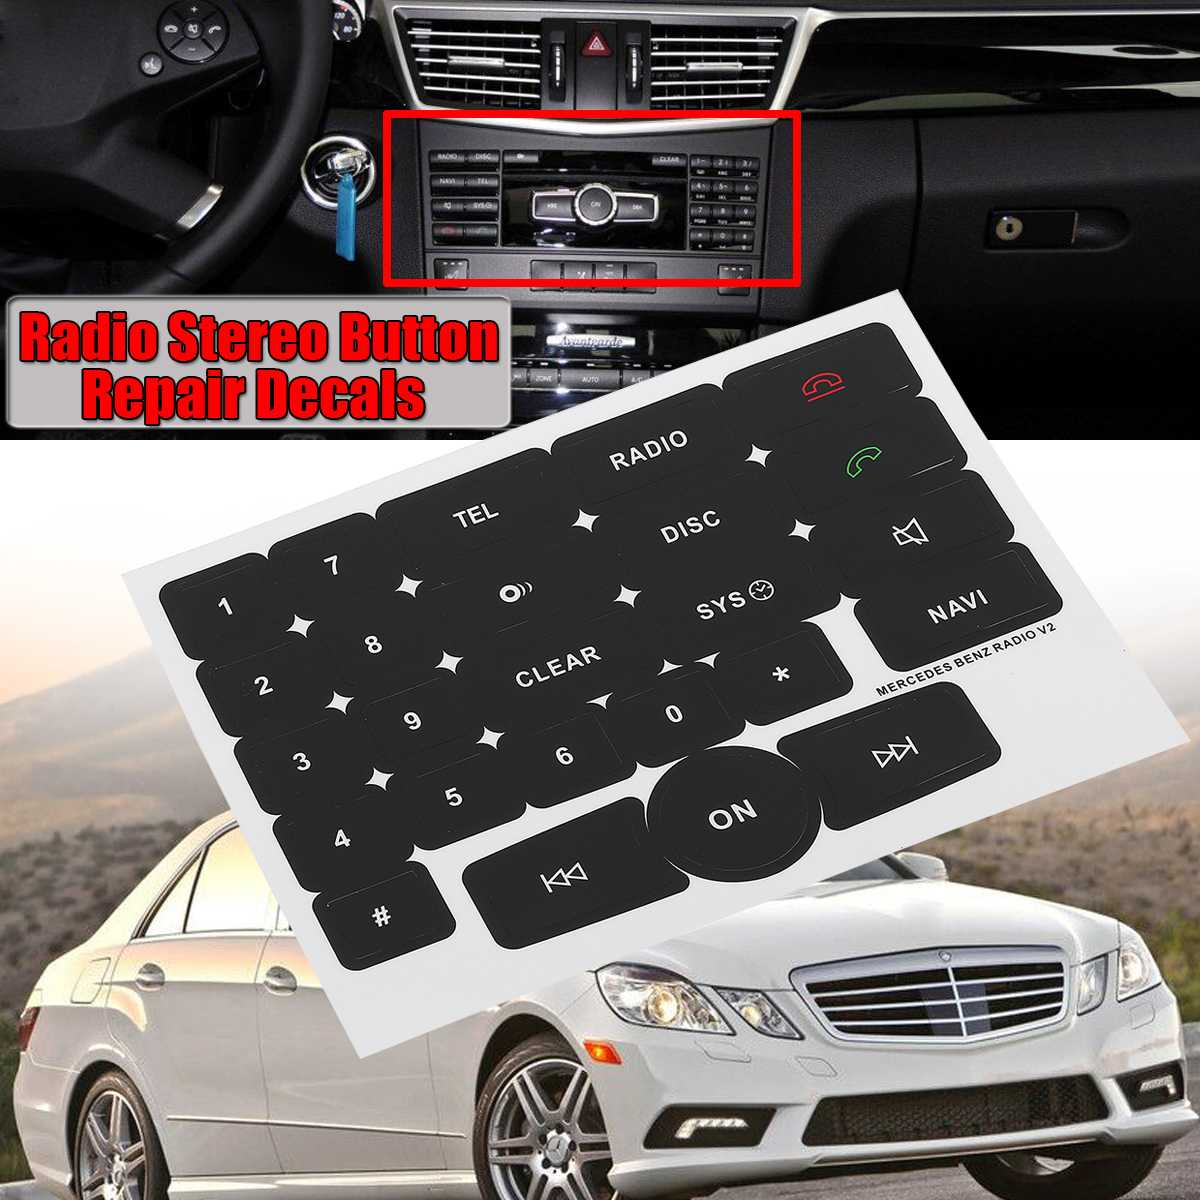 Stereo Button Repair Decals Stickers For Mercedes For Benz Radio